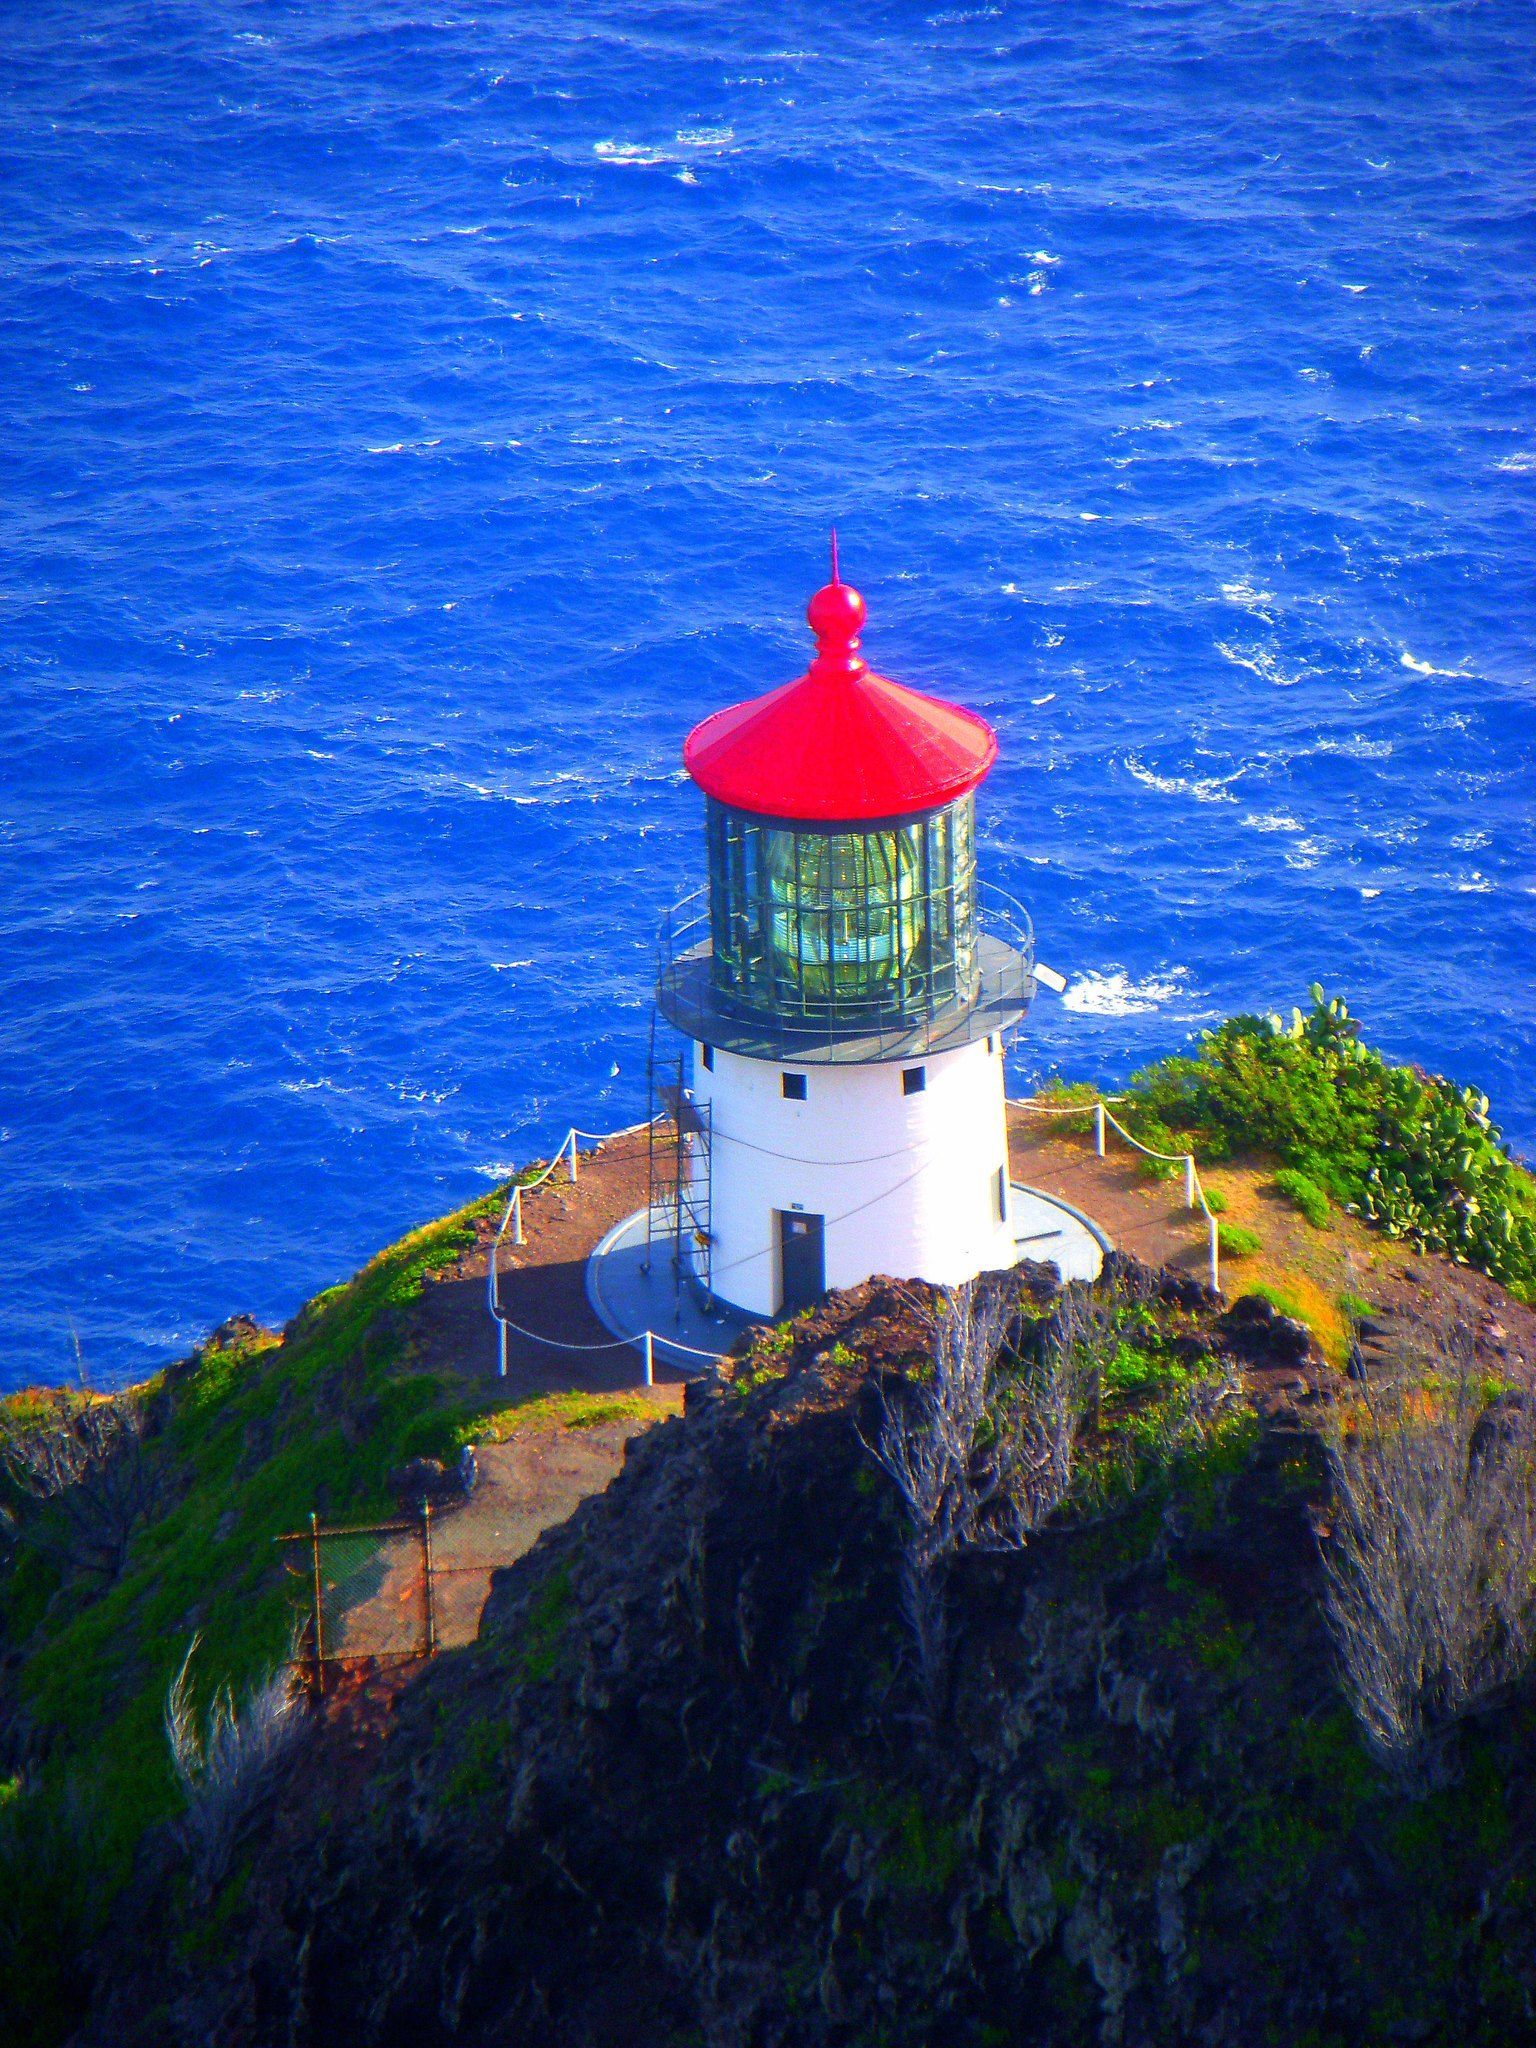 World's Largest Lighthouse Lens, world record in Oʻahu, Hawaii
